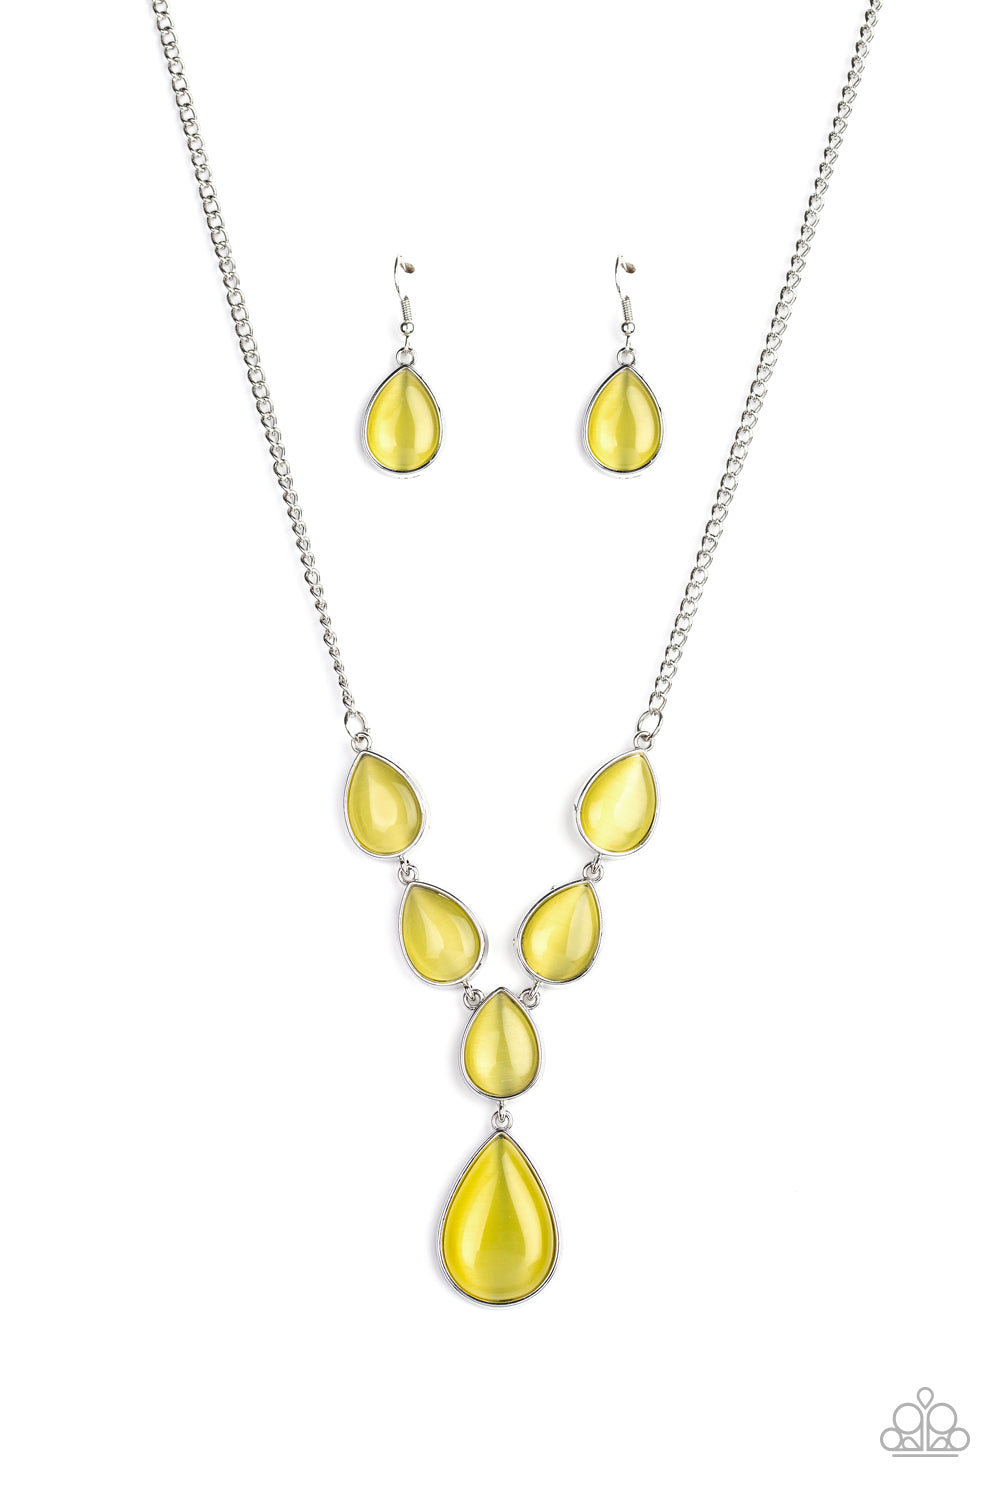 Paparazzi Accessories Dewy Decadence - Yellow Necklaces - Lady T Accessories